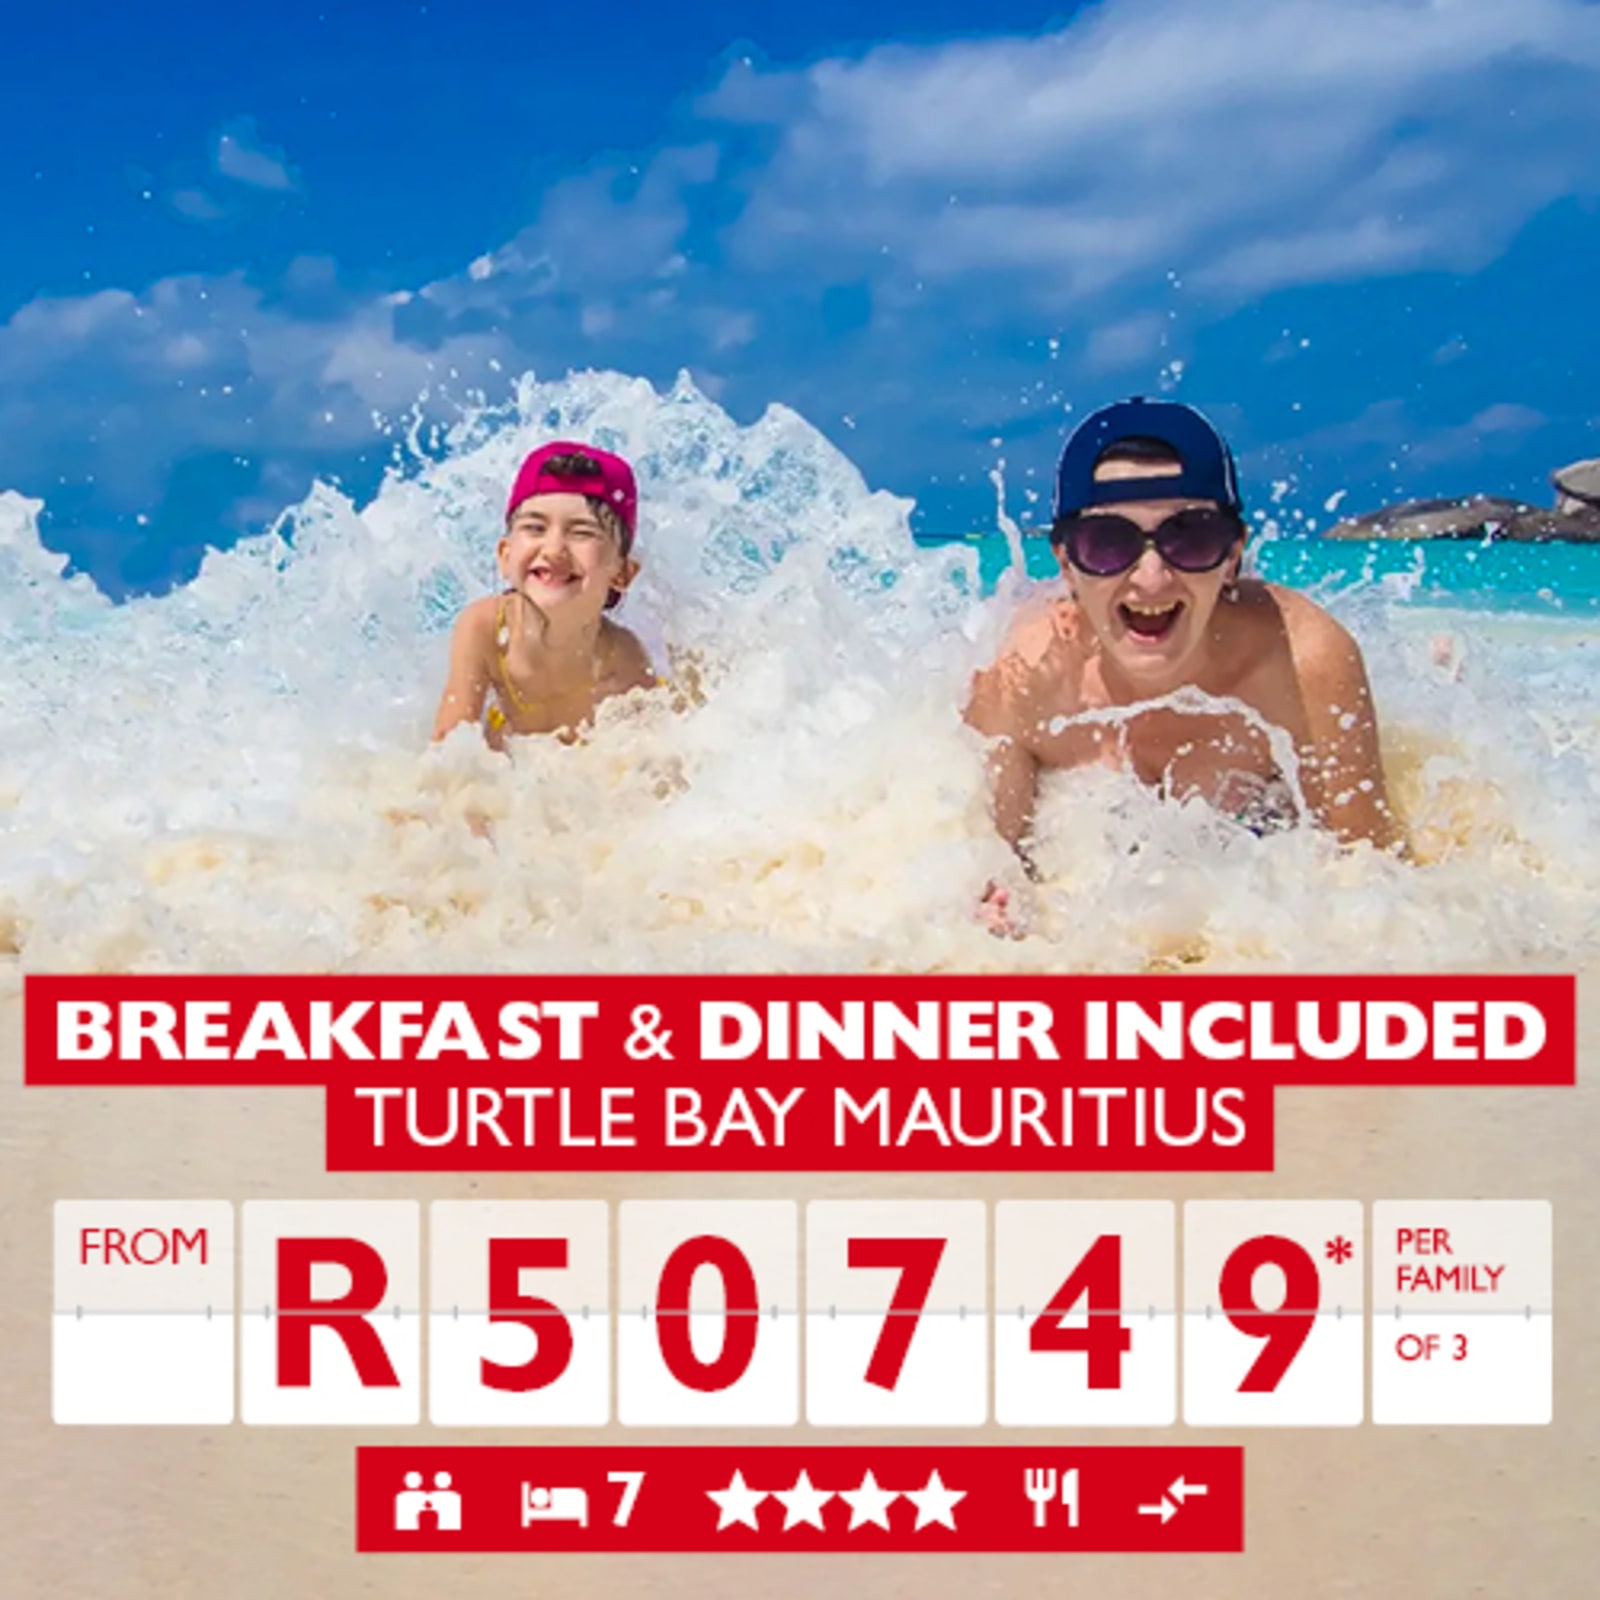 Breakfast & dinner included. Turtle Bay Mauritius from R50749* per family of 3